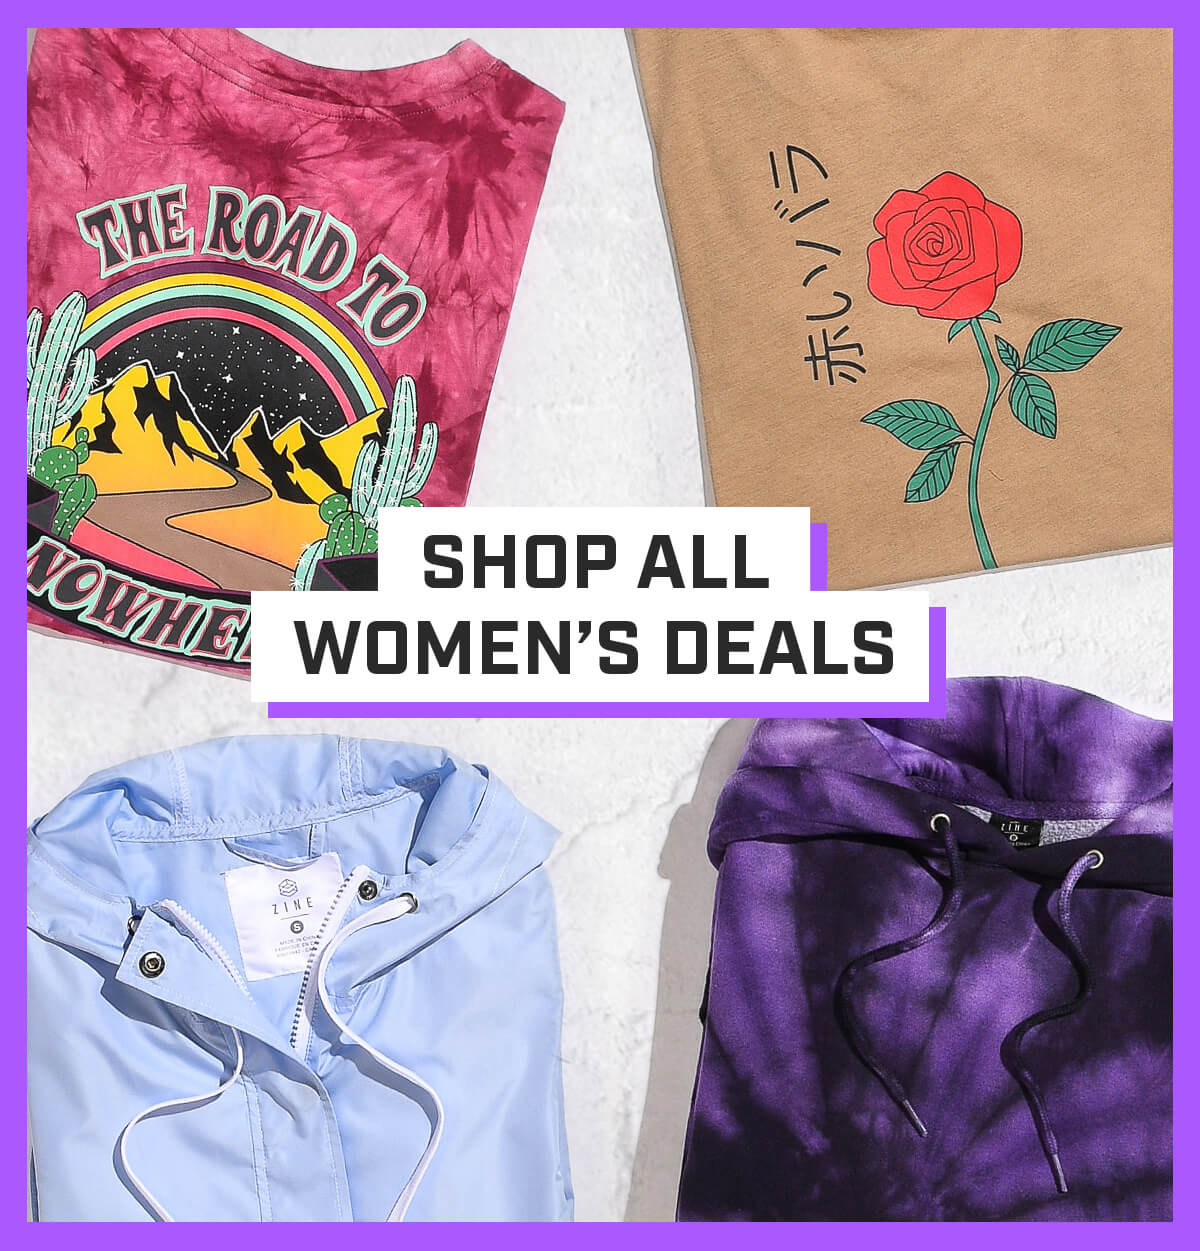 WOMEN'S PACKAGE DEALS - SAVE UP TO 25% WHEN YOU BUY ITEMS TOGETHER